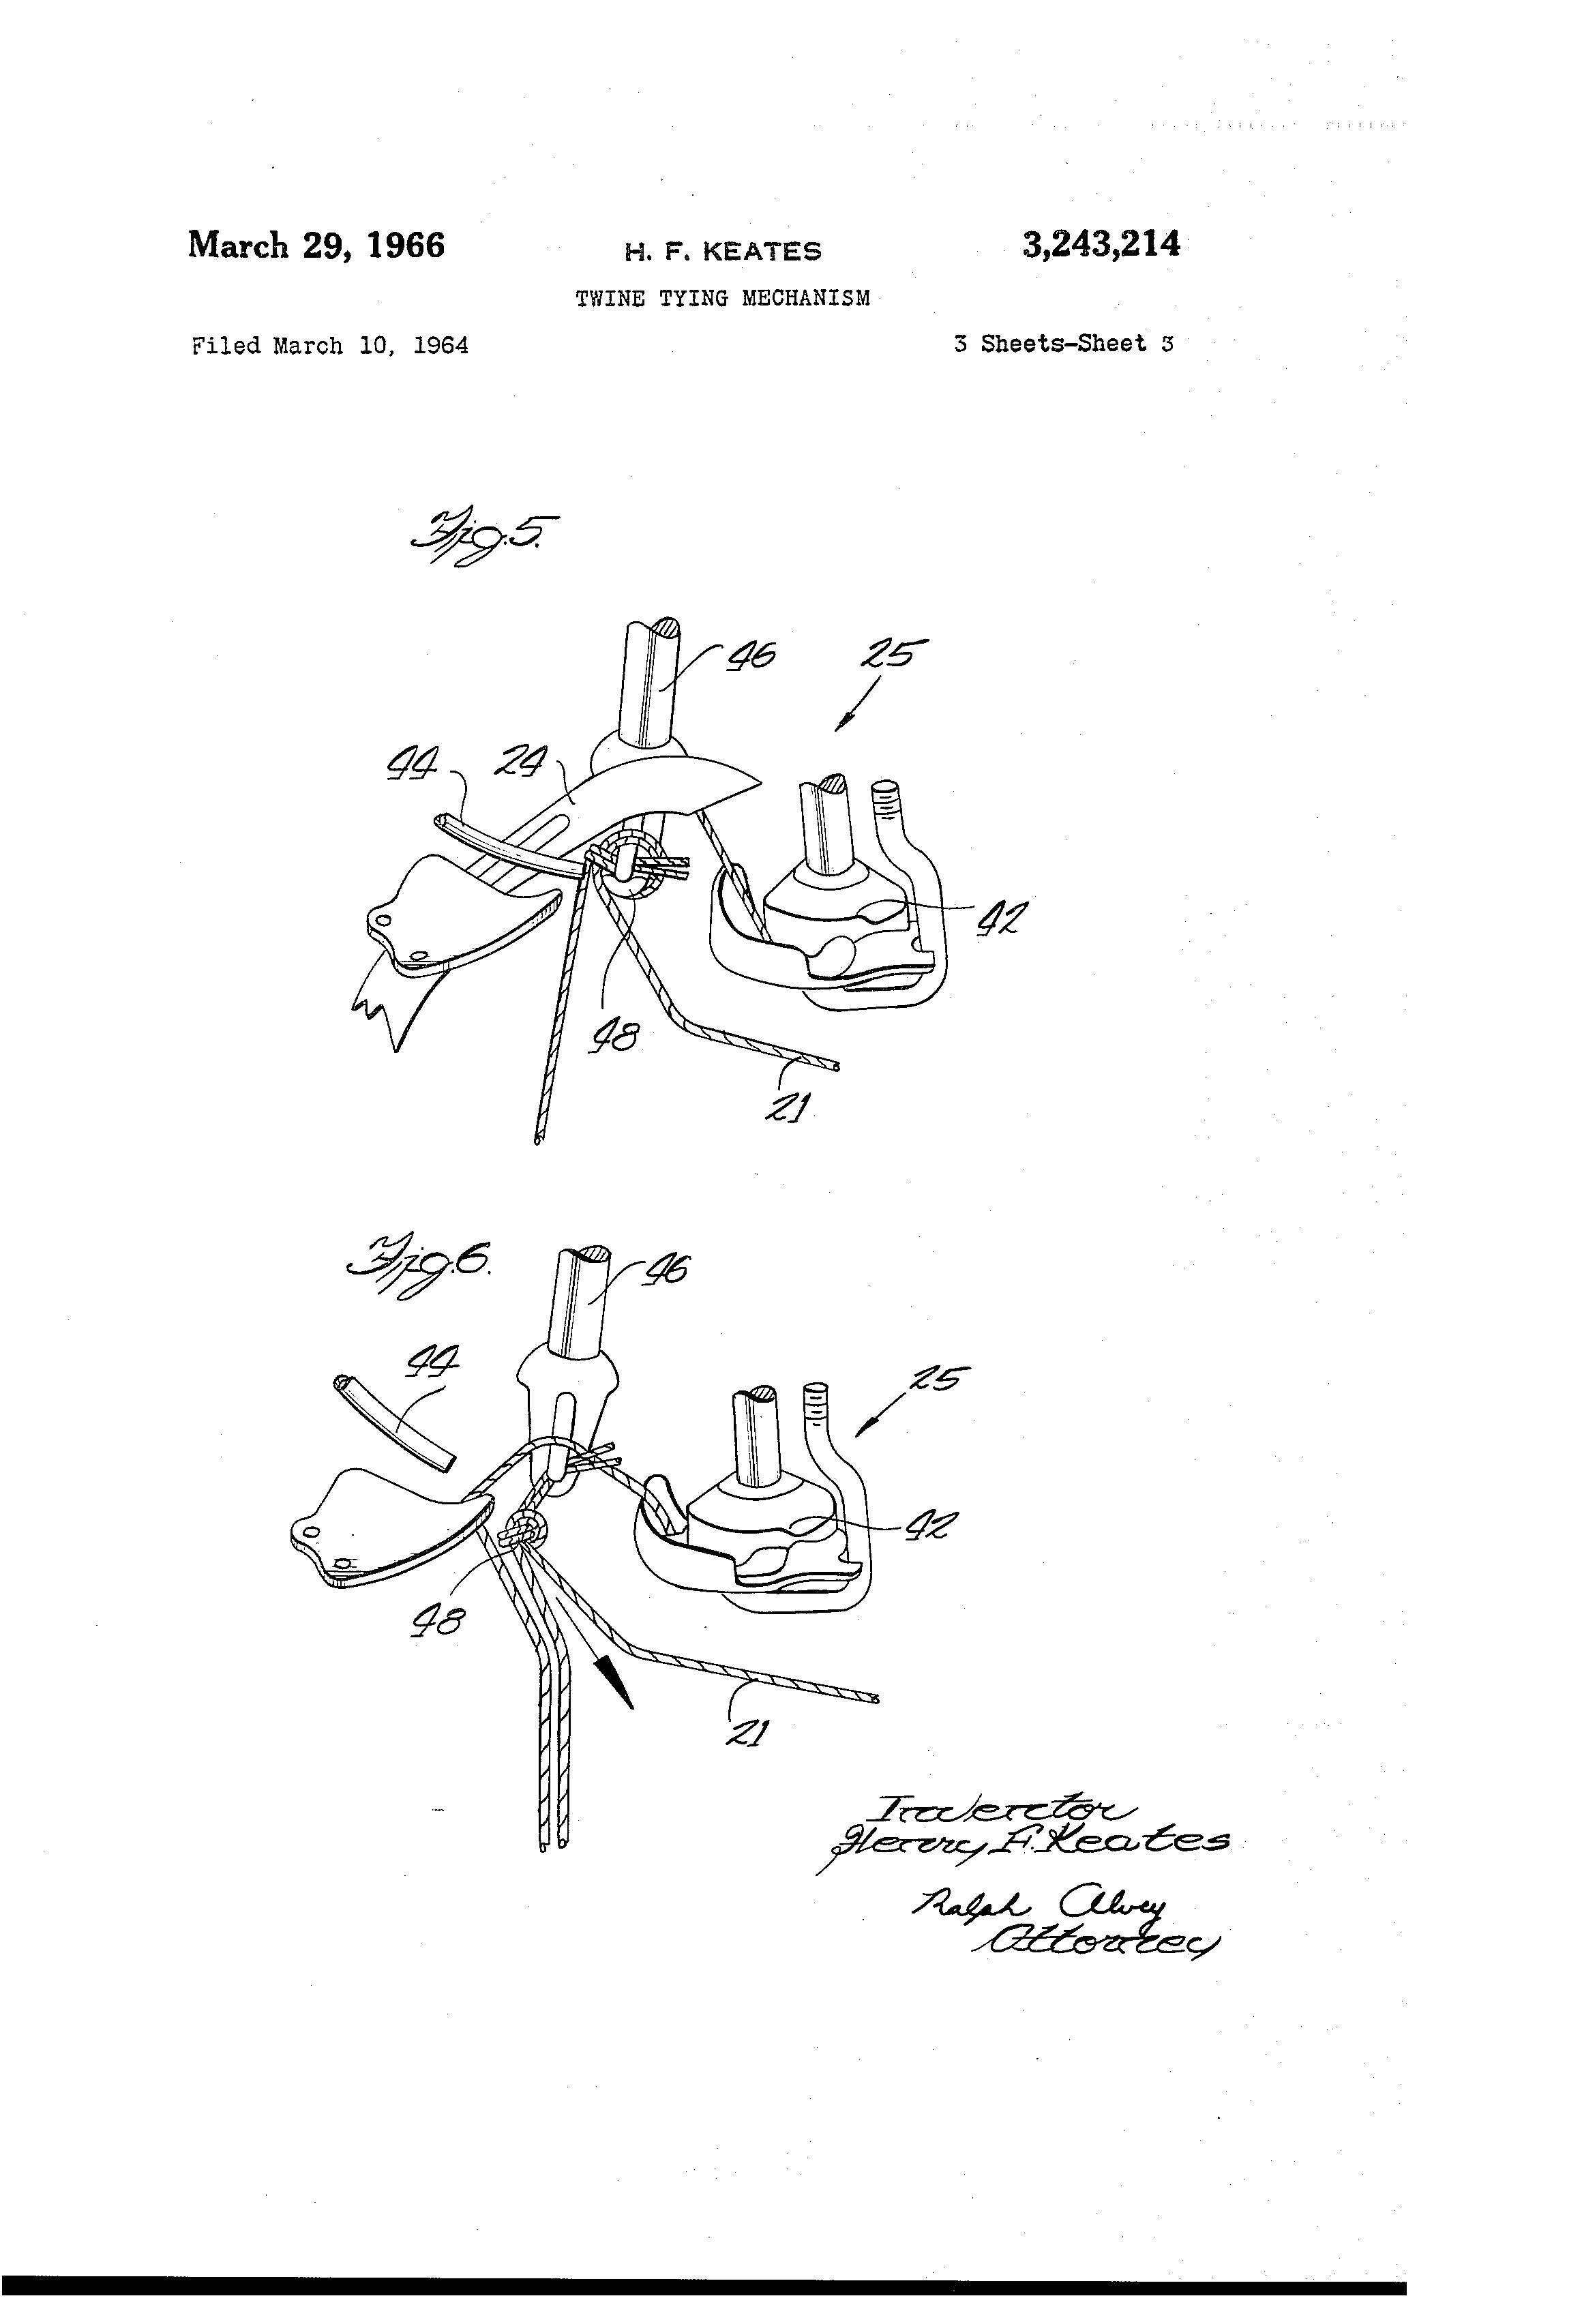 Patent of the Day: Twine Tying Mechanism | Suiter Swantz IP